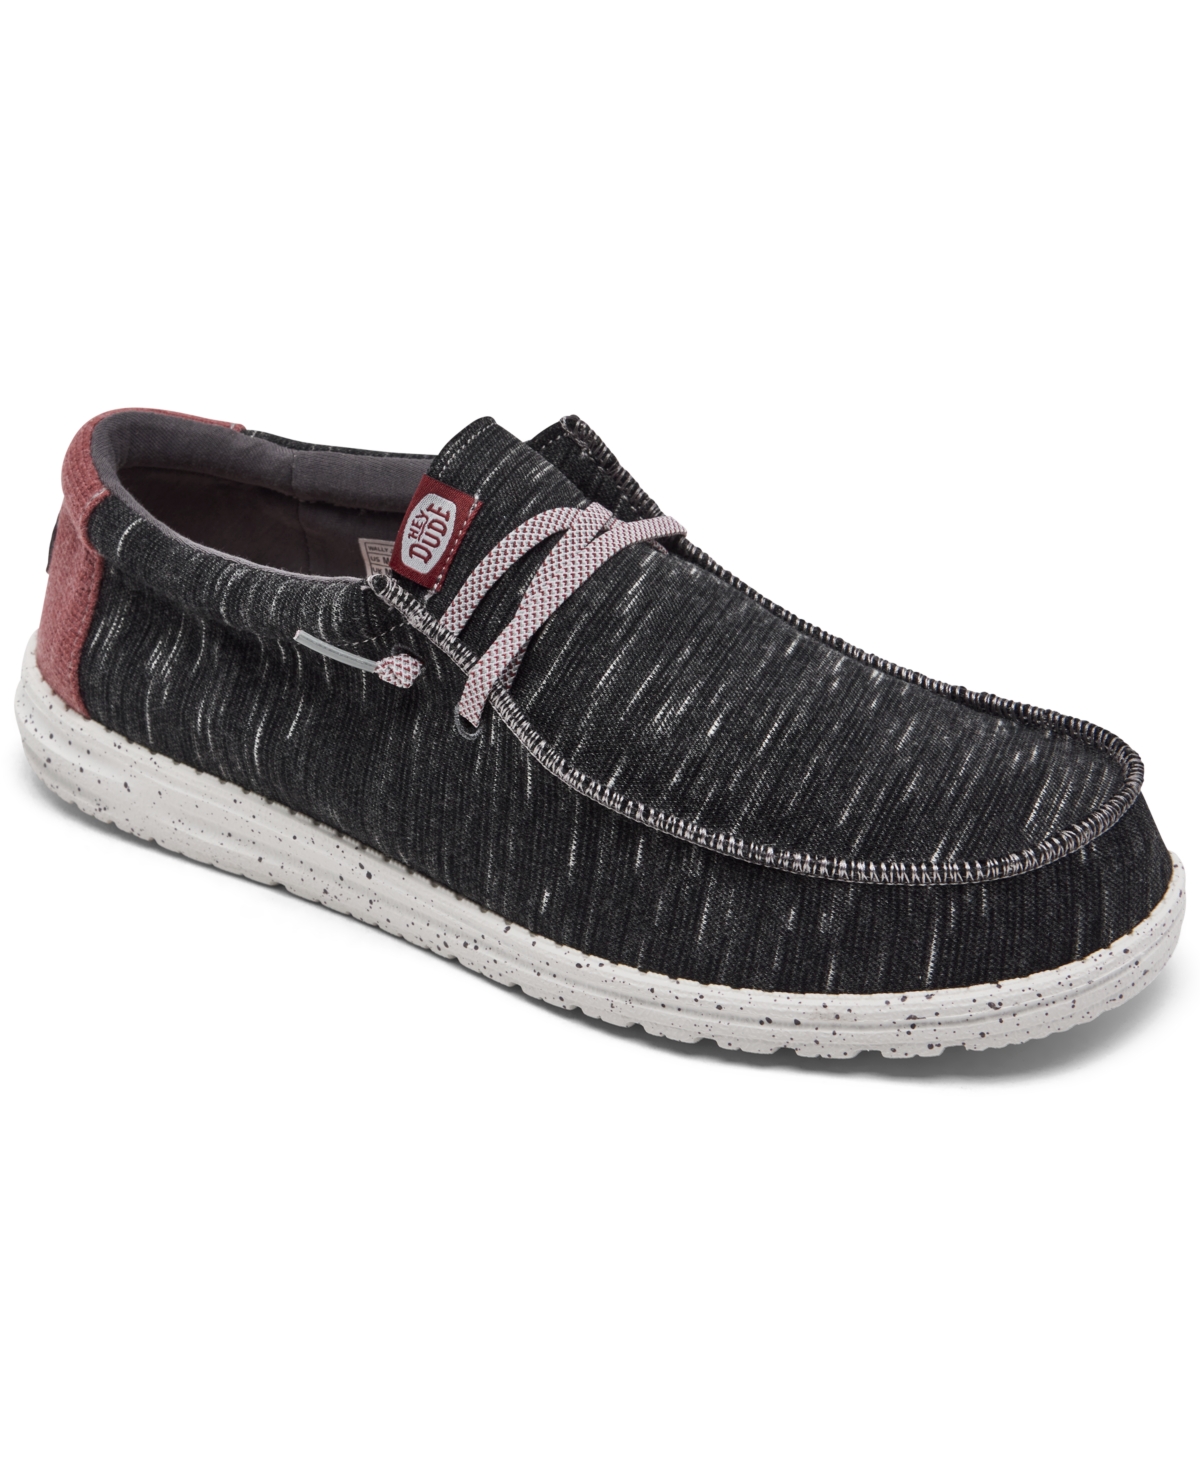 Men's Wally Jersey Casual Moccasin Sneakers from Finish Line - Black Heathered